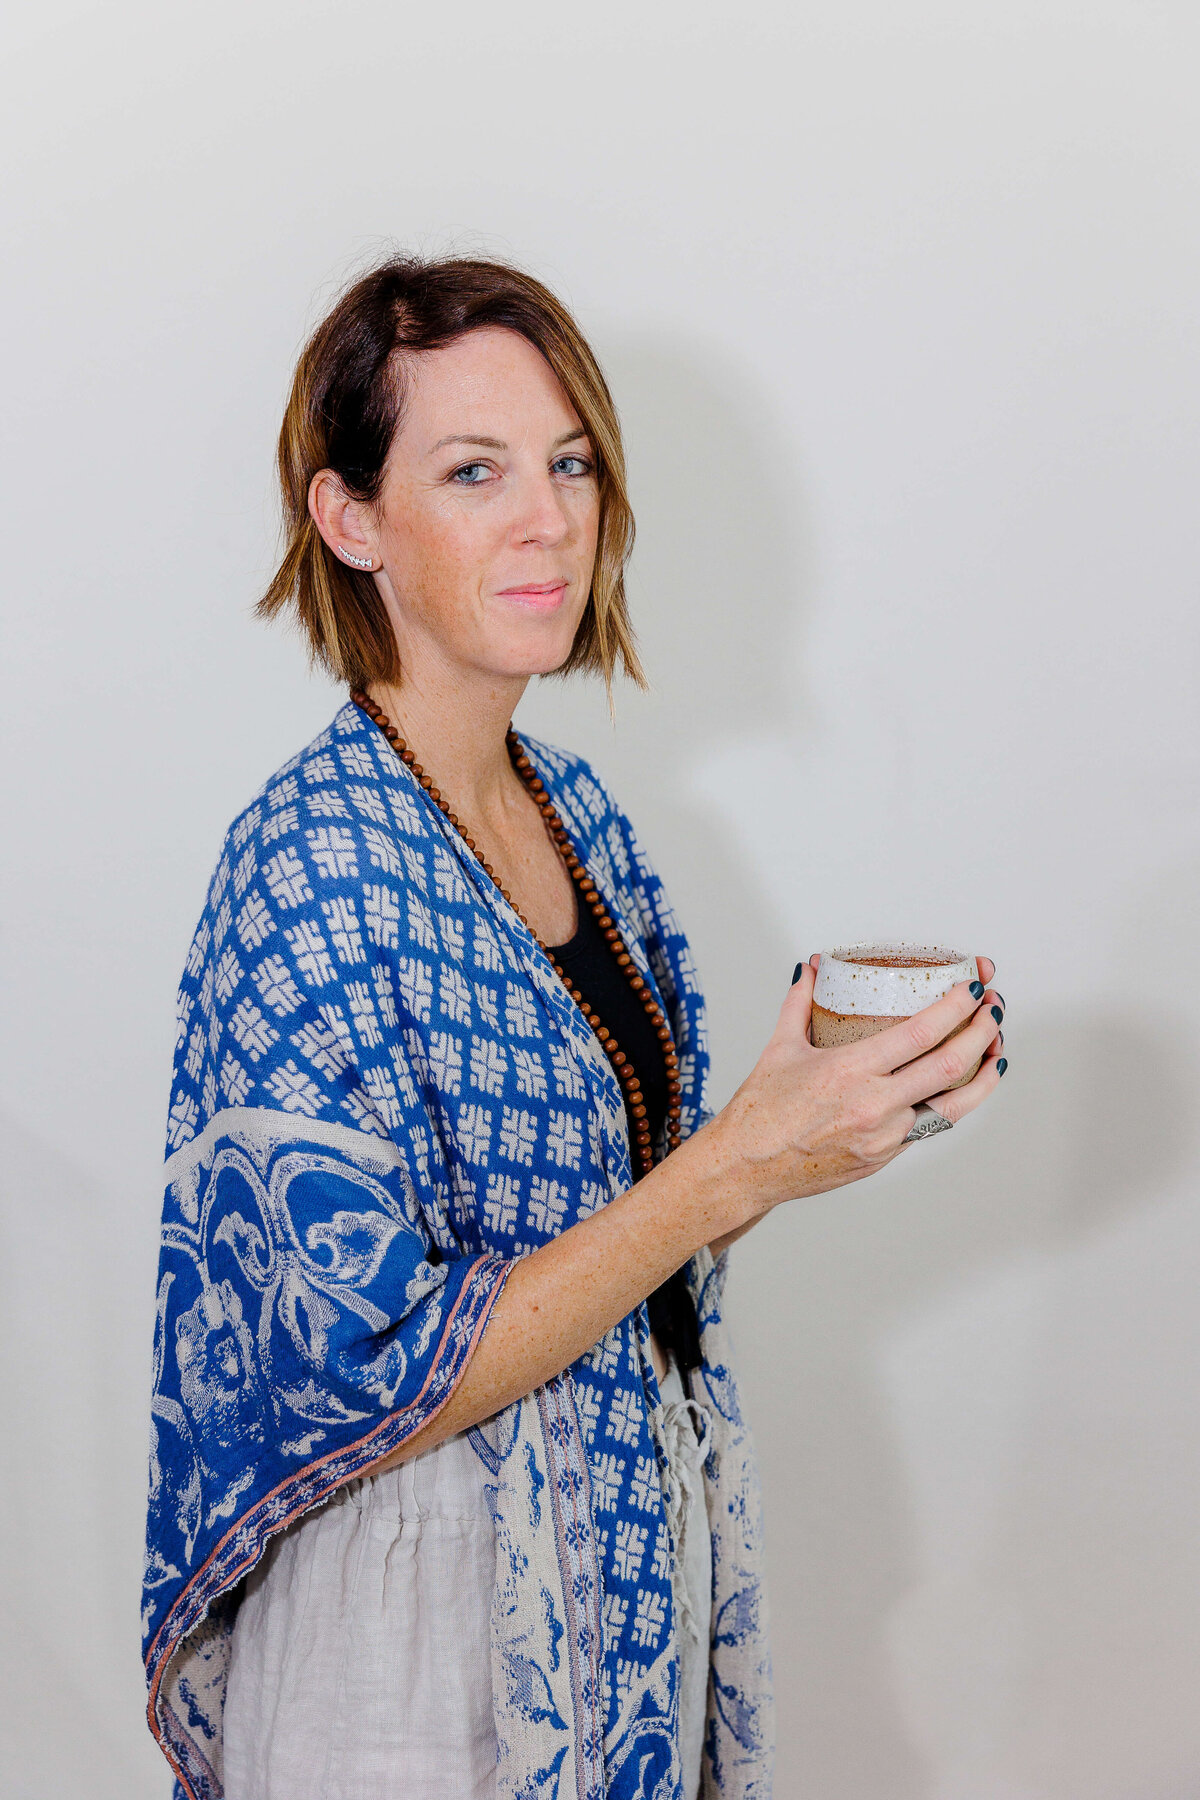 Lady in blue wrap holding hot chocolate at her branding session